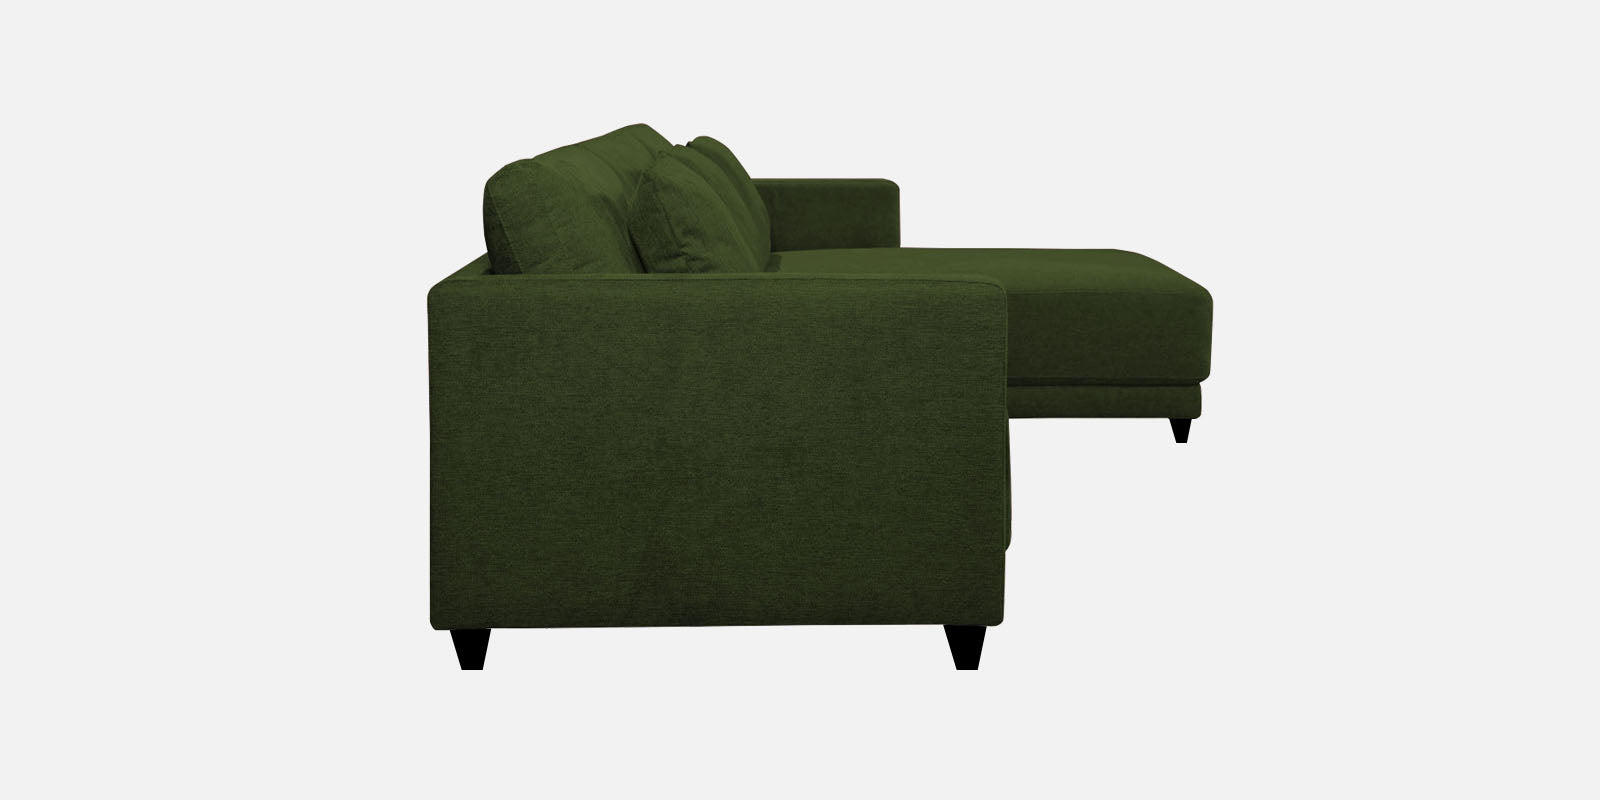 Kera Fabric LHS Sectional Sofa (3+Lounger) In Olive Green Colour